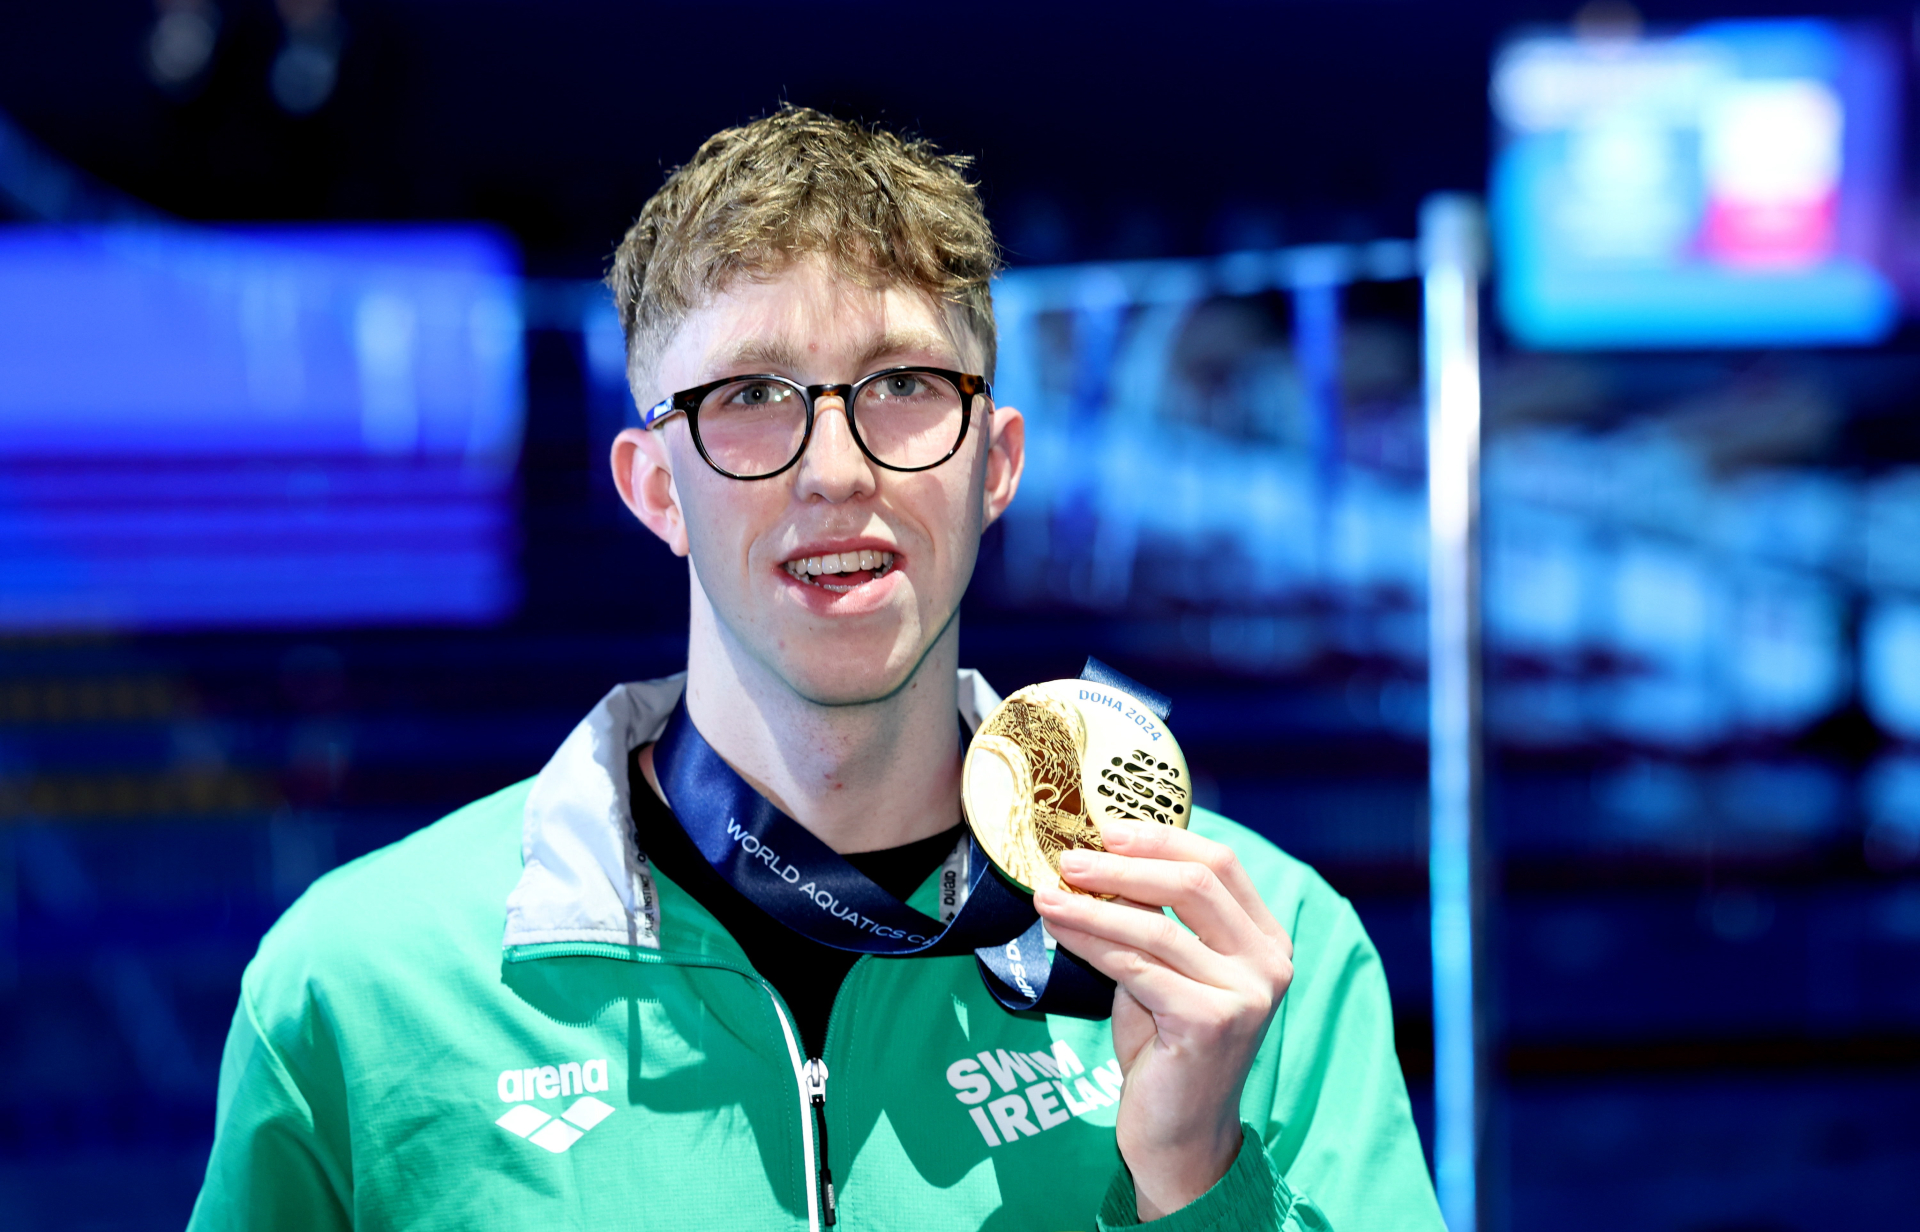 Daniel Wiffen of Ireland with his gold medal after winning the Men's 1500m freestyle